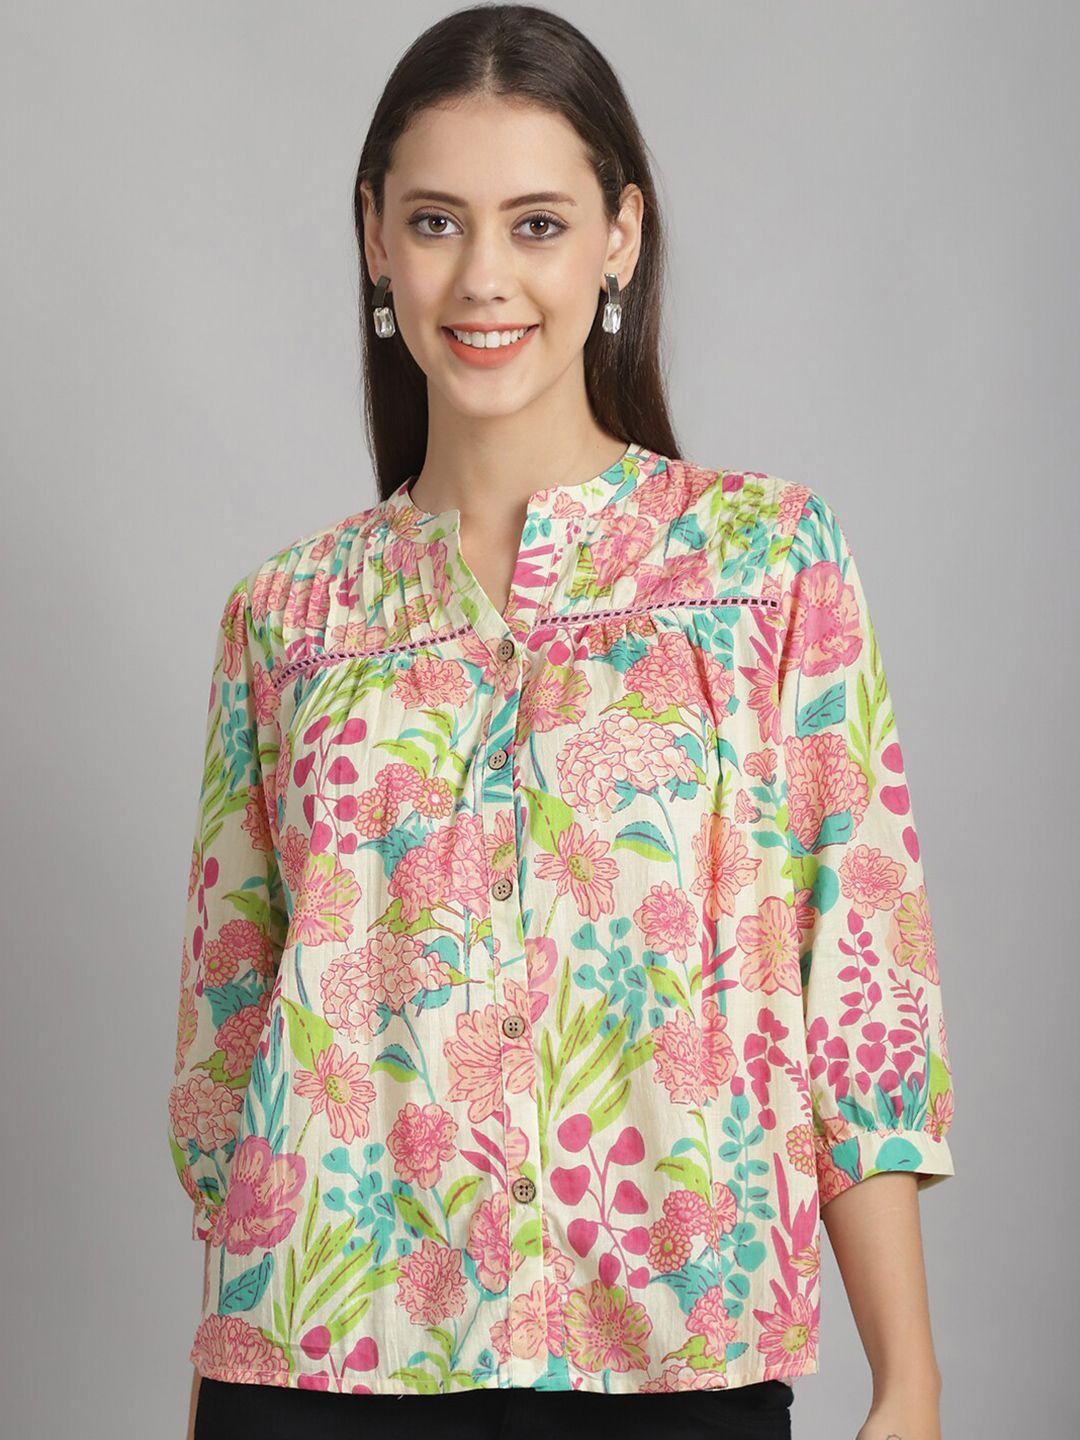 frempy floral printed mandarin collar cuffed sleeves pure cotton top